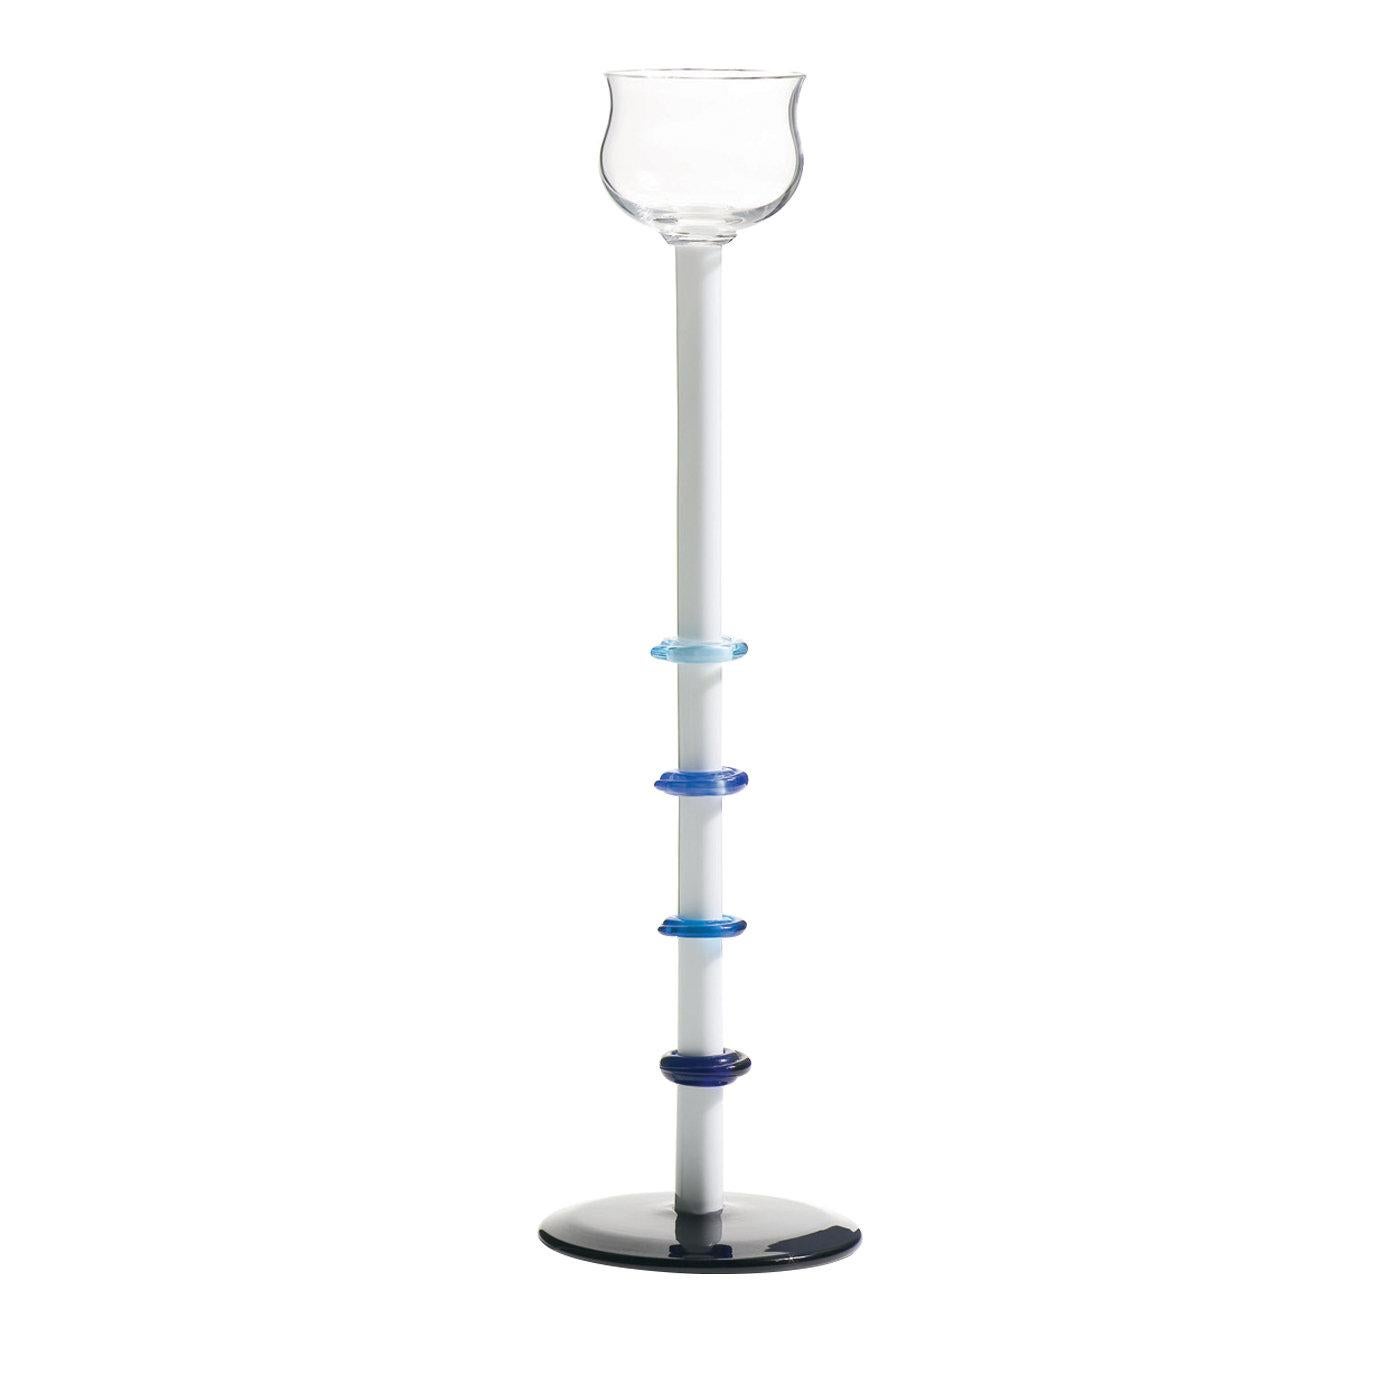 Delle Silenziose Lacrime Limited Edition Wine Glass by Ettore Sottsass